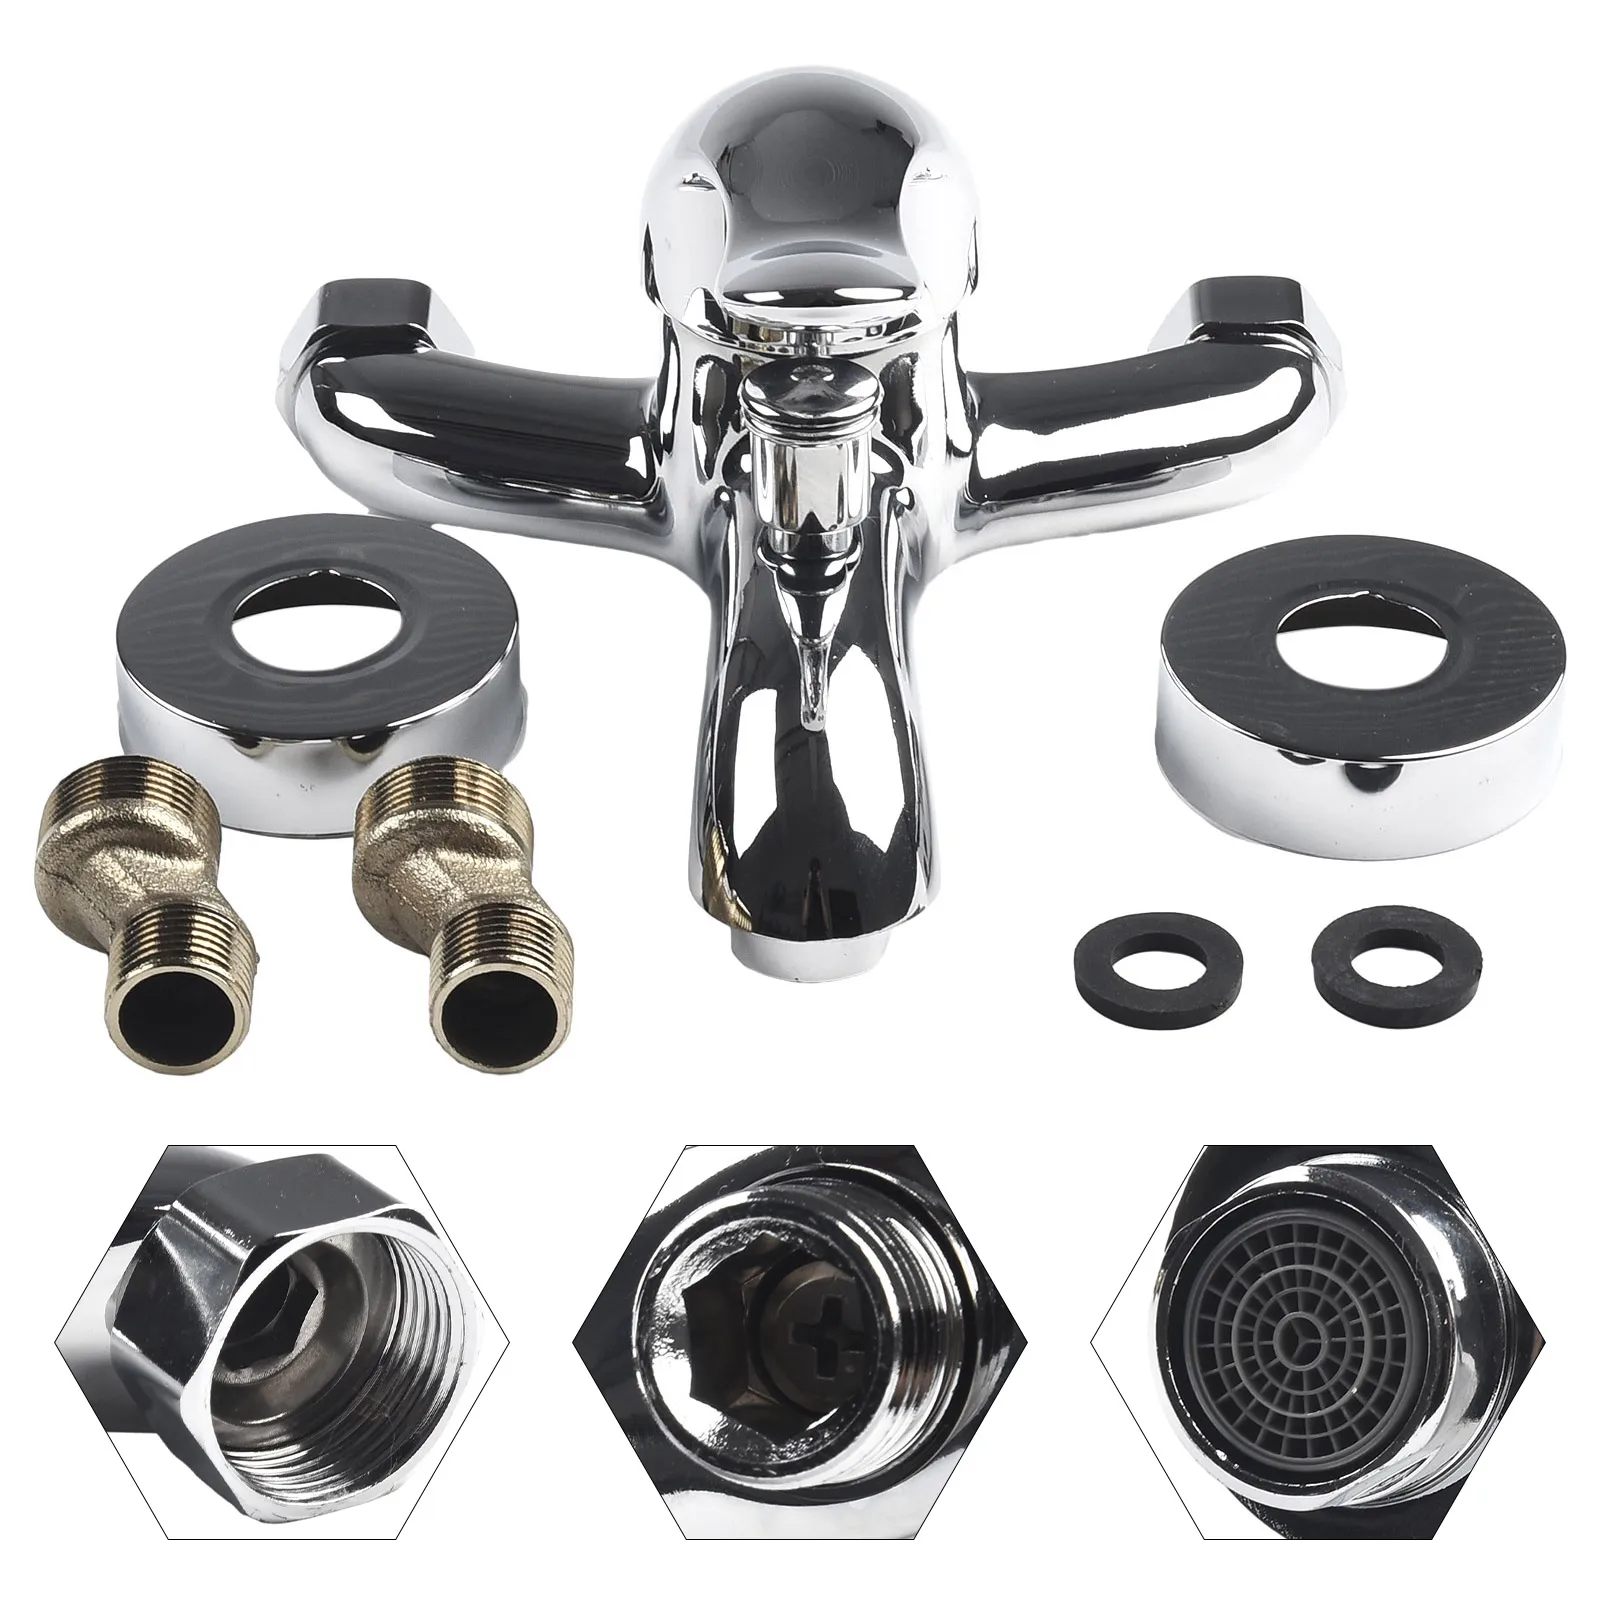 

Durable Basin Faucets Mixing Valve Kits Thermostats Triple Wall Mounted Zinc Alloy Accessories Dual Spout Bathtub